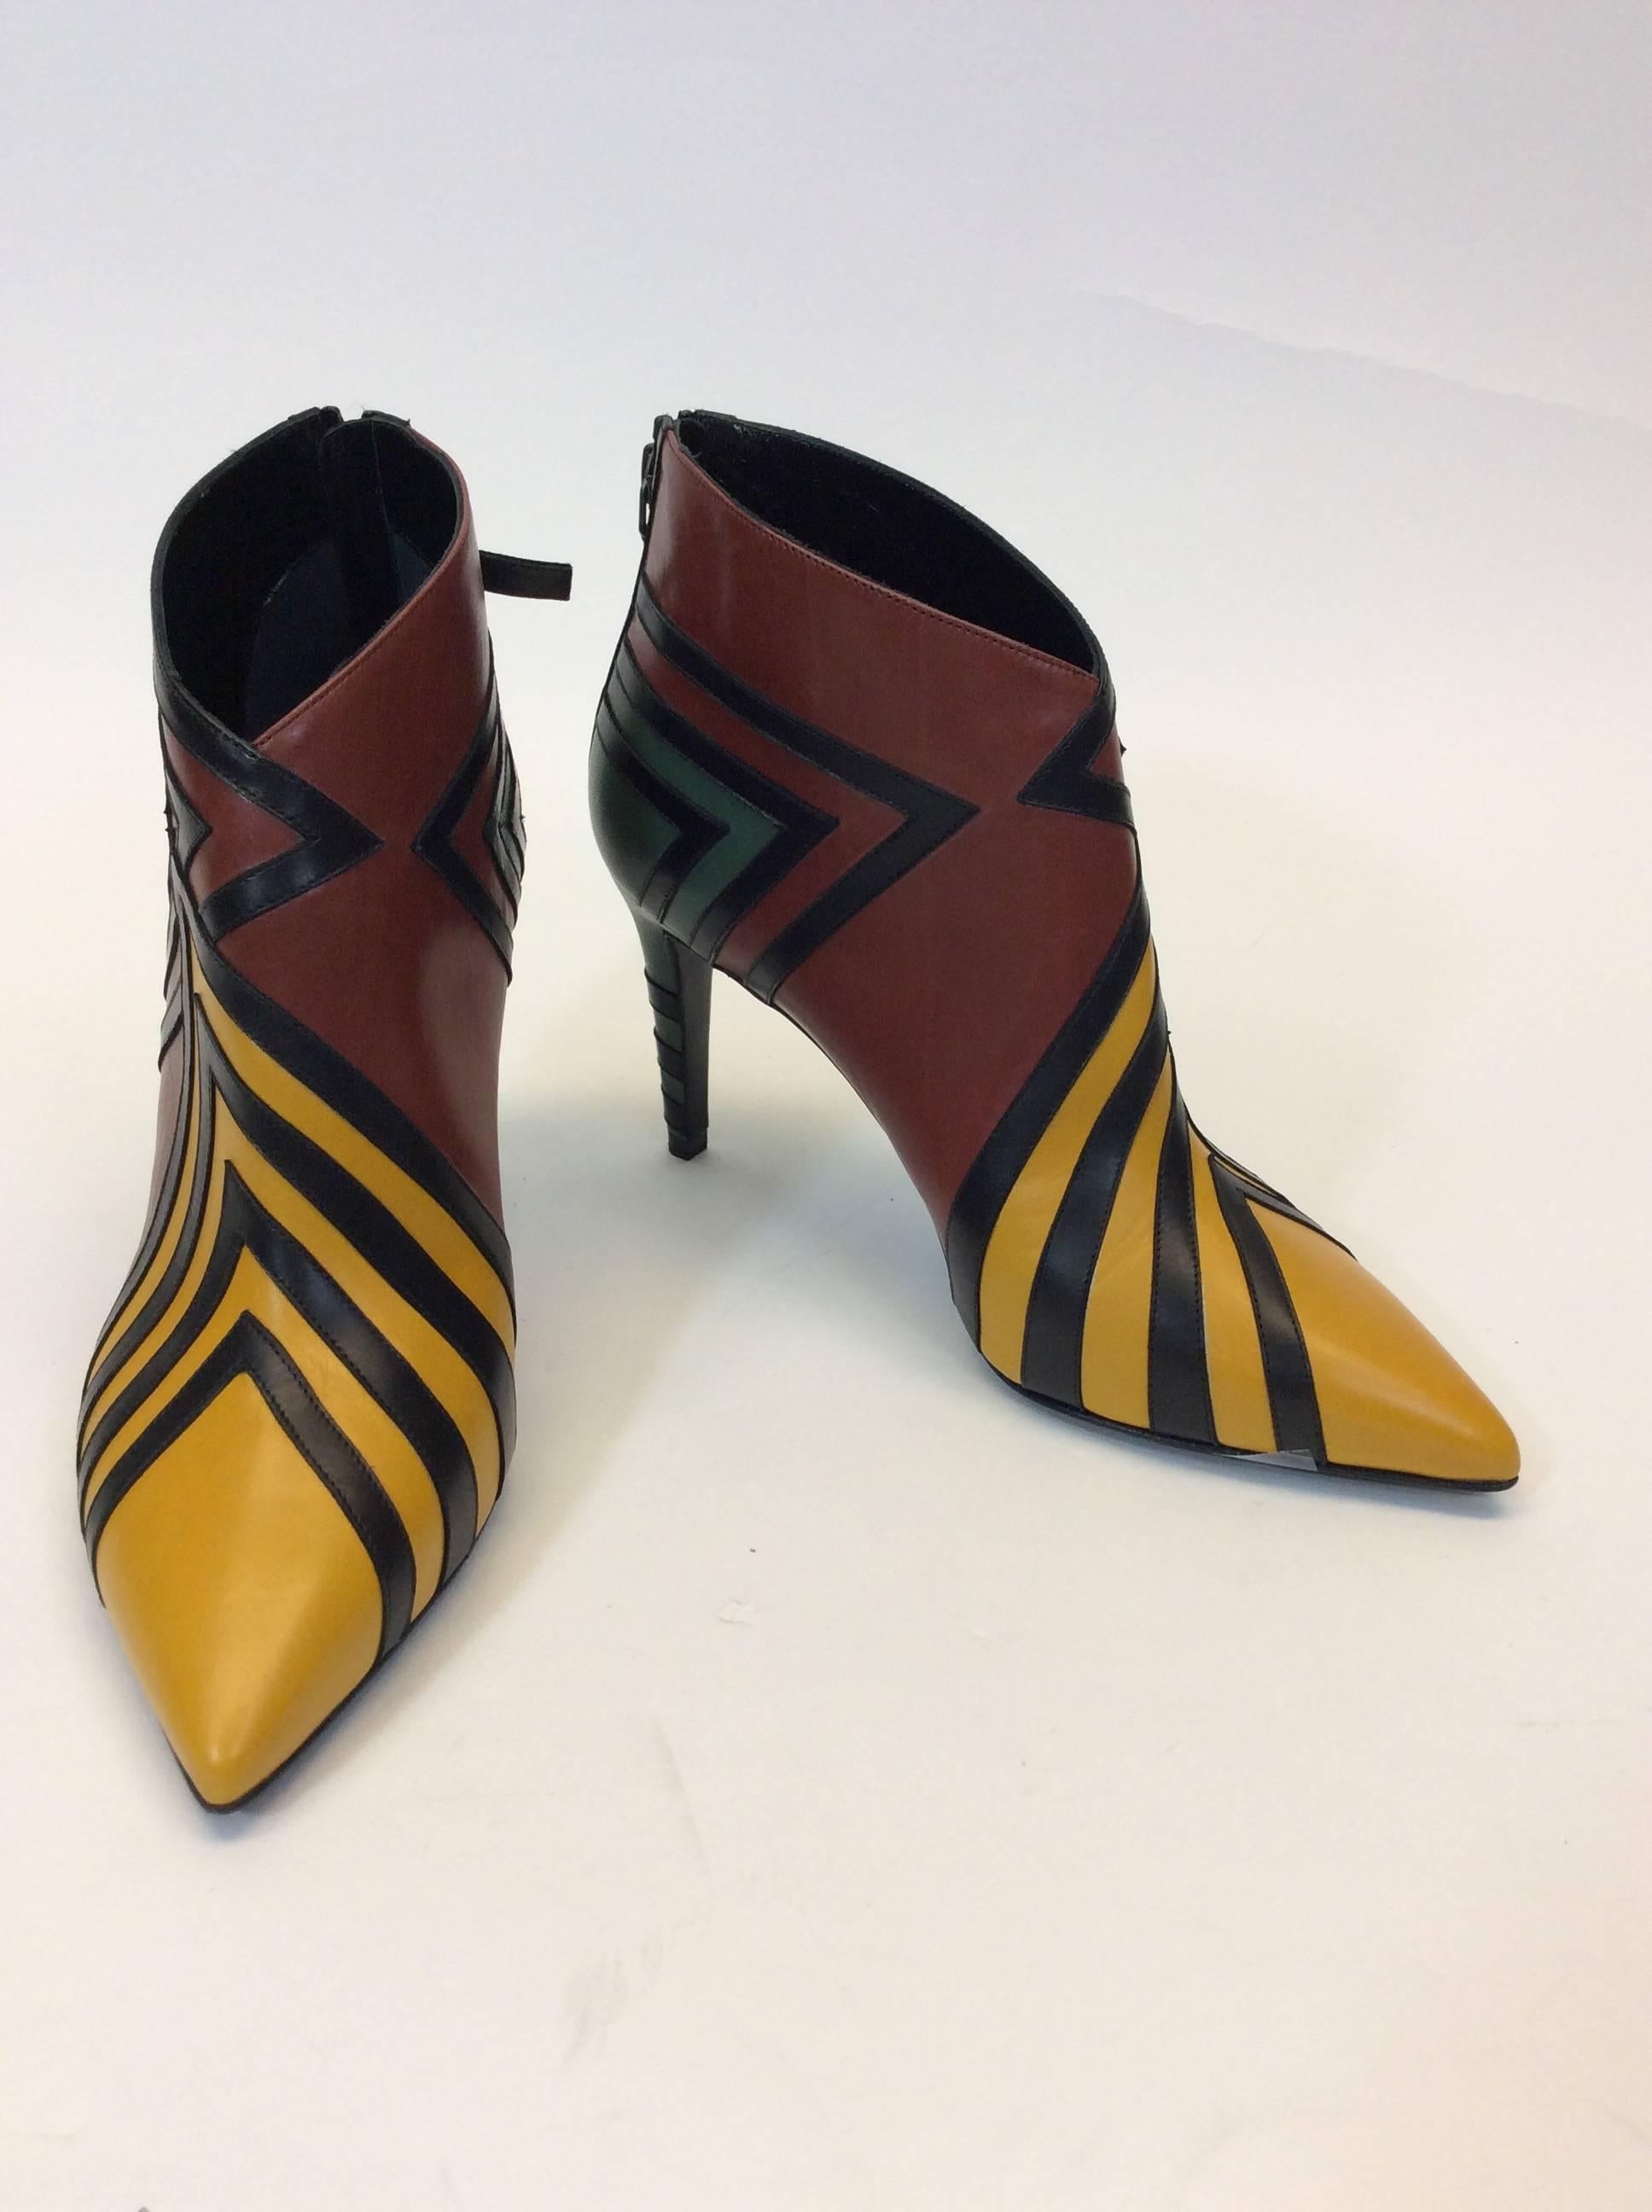 Pierre Hardy Genuine Leather Bootie 
Multi Colored Pattern with Black Details
Zipper On back of Ankle 
Hand Made In Italy
Never Before Worn
3.5” Inch Heel
3” Inch Sole